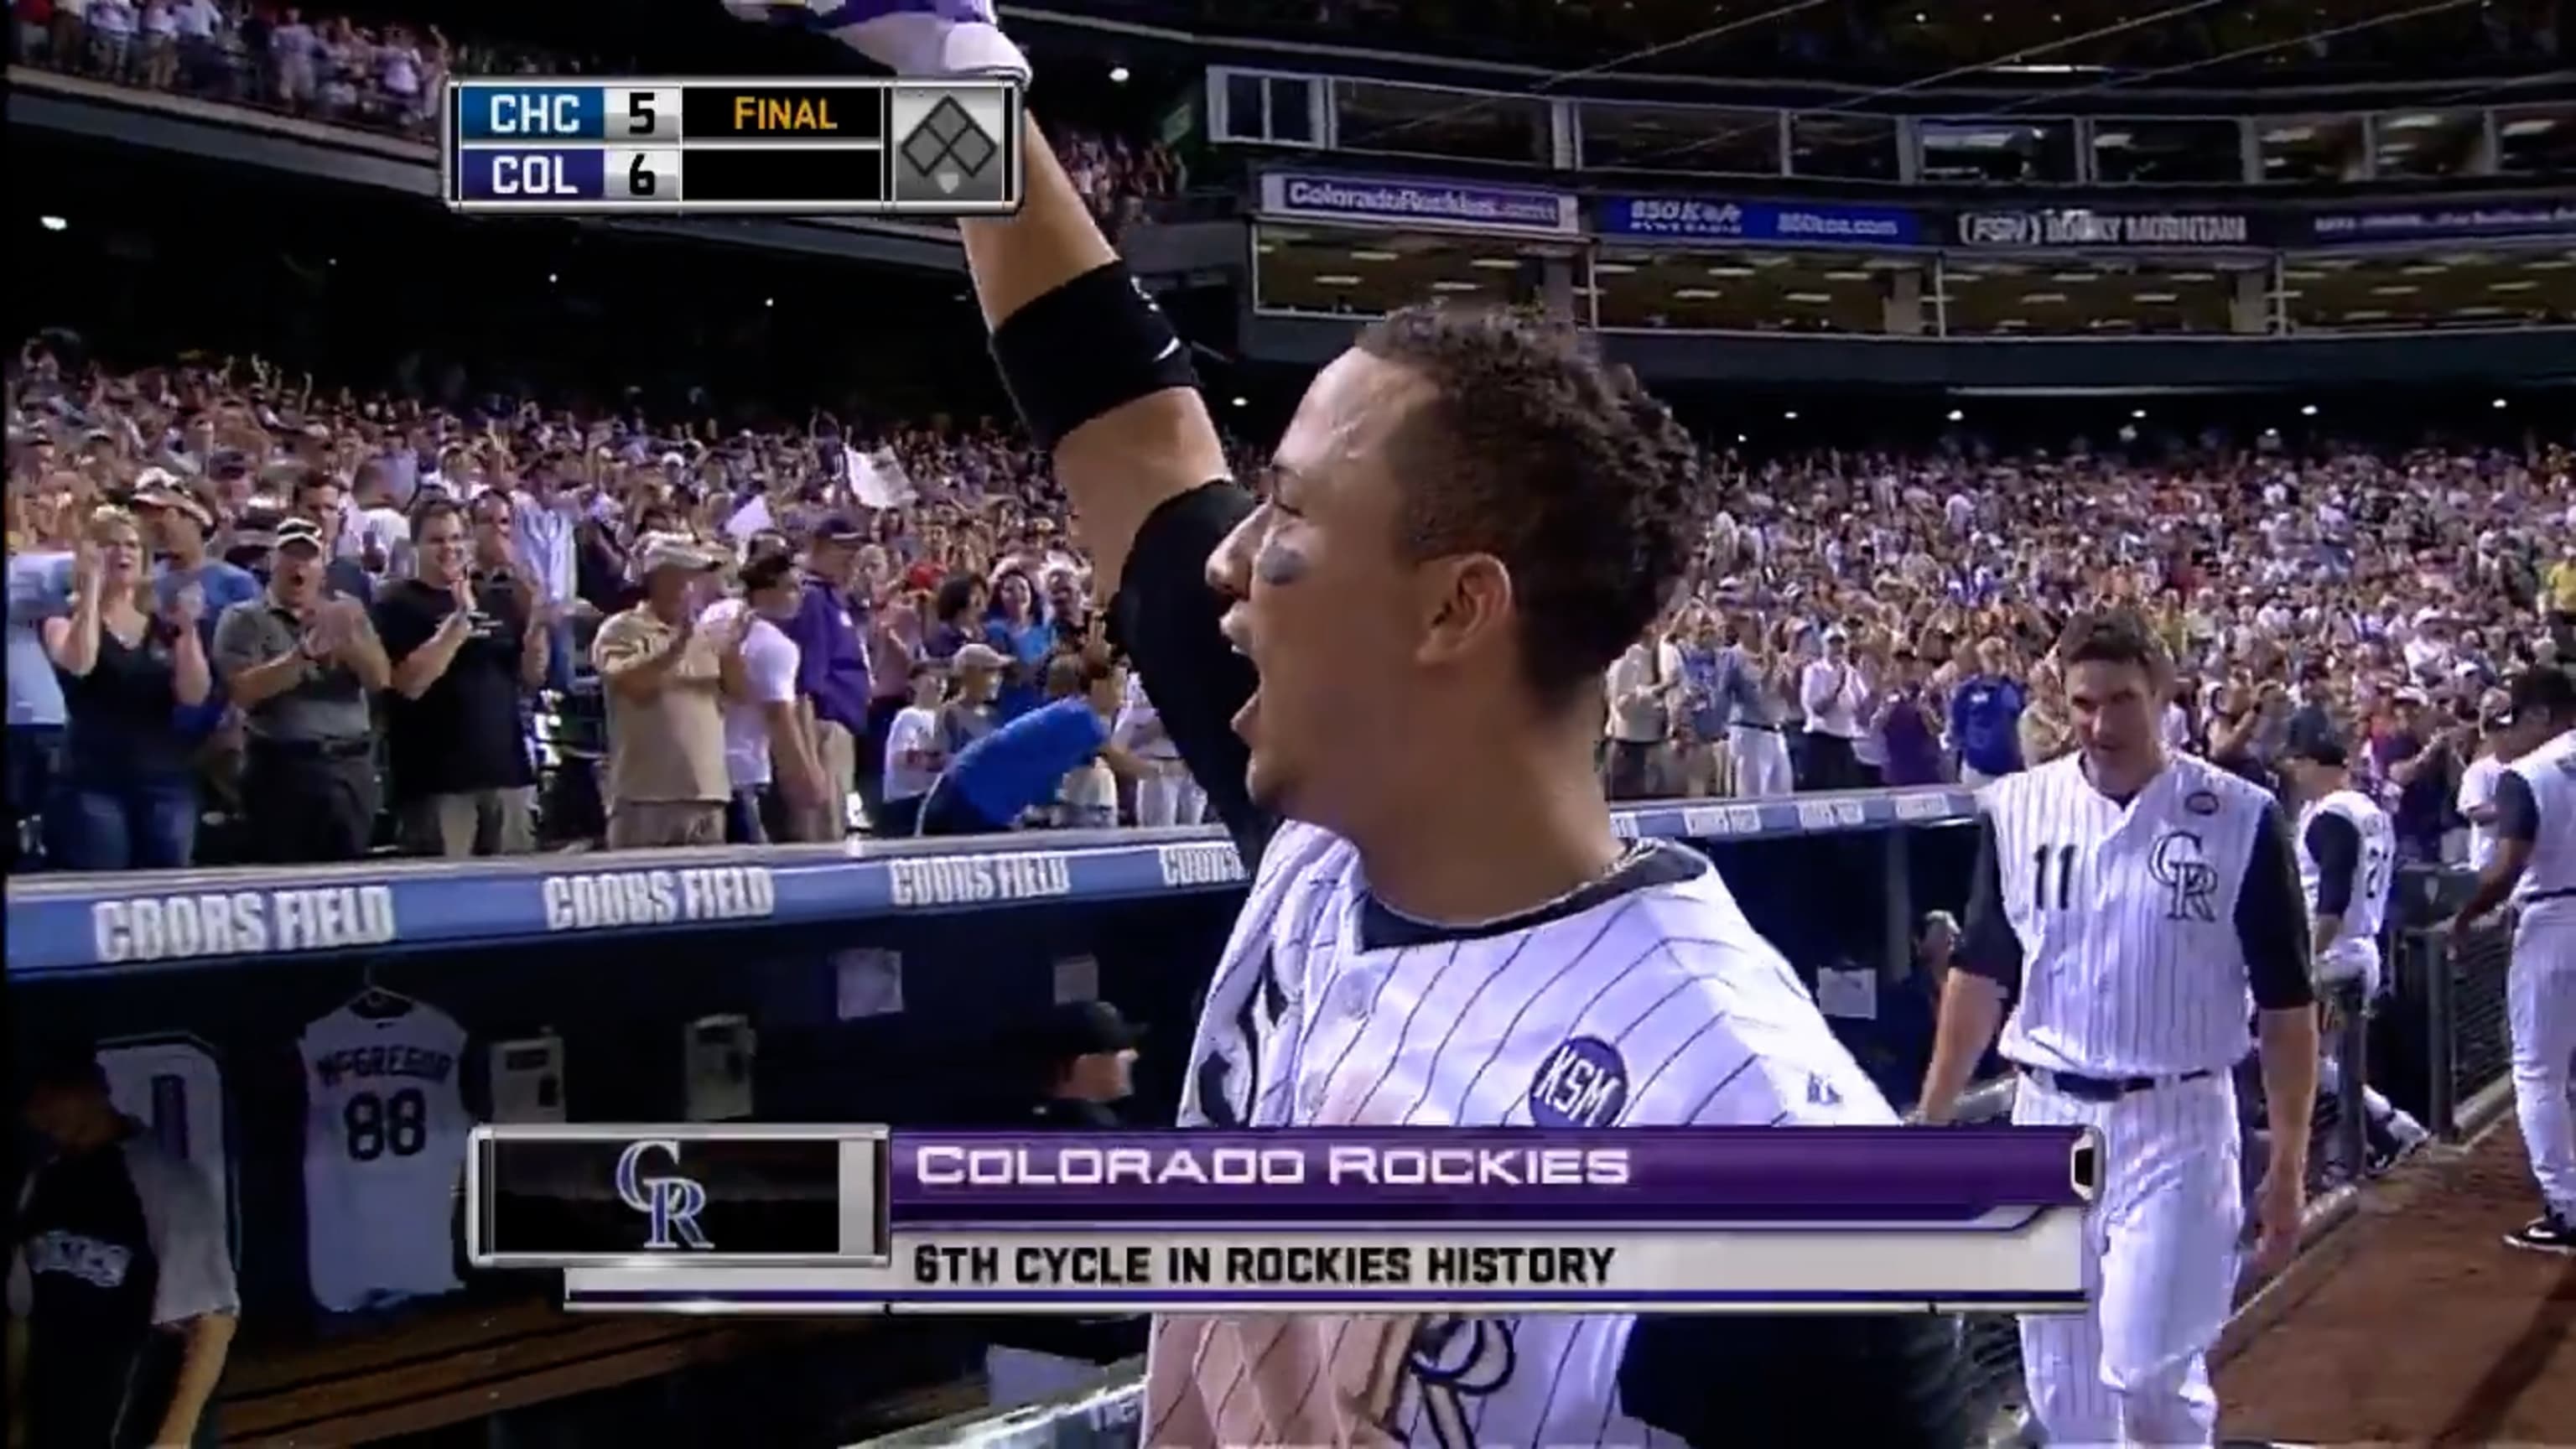 Colorado Rockies  - 3 years ago, Rockies' Nolan Arenado hits for the cycle  in amazing fashion on Father's Day